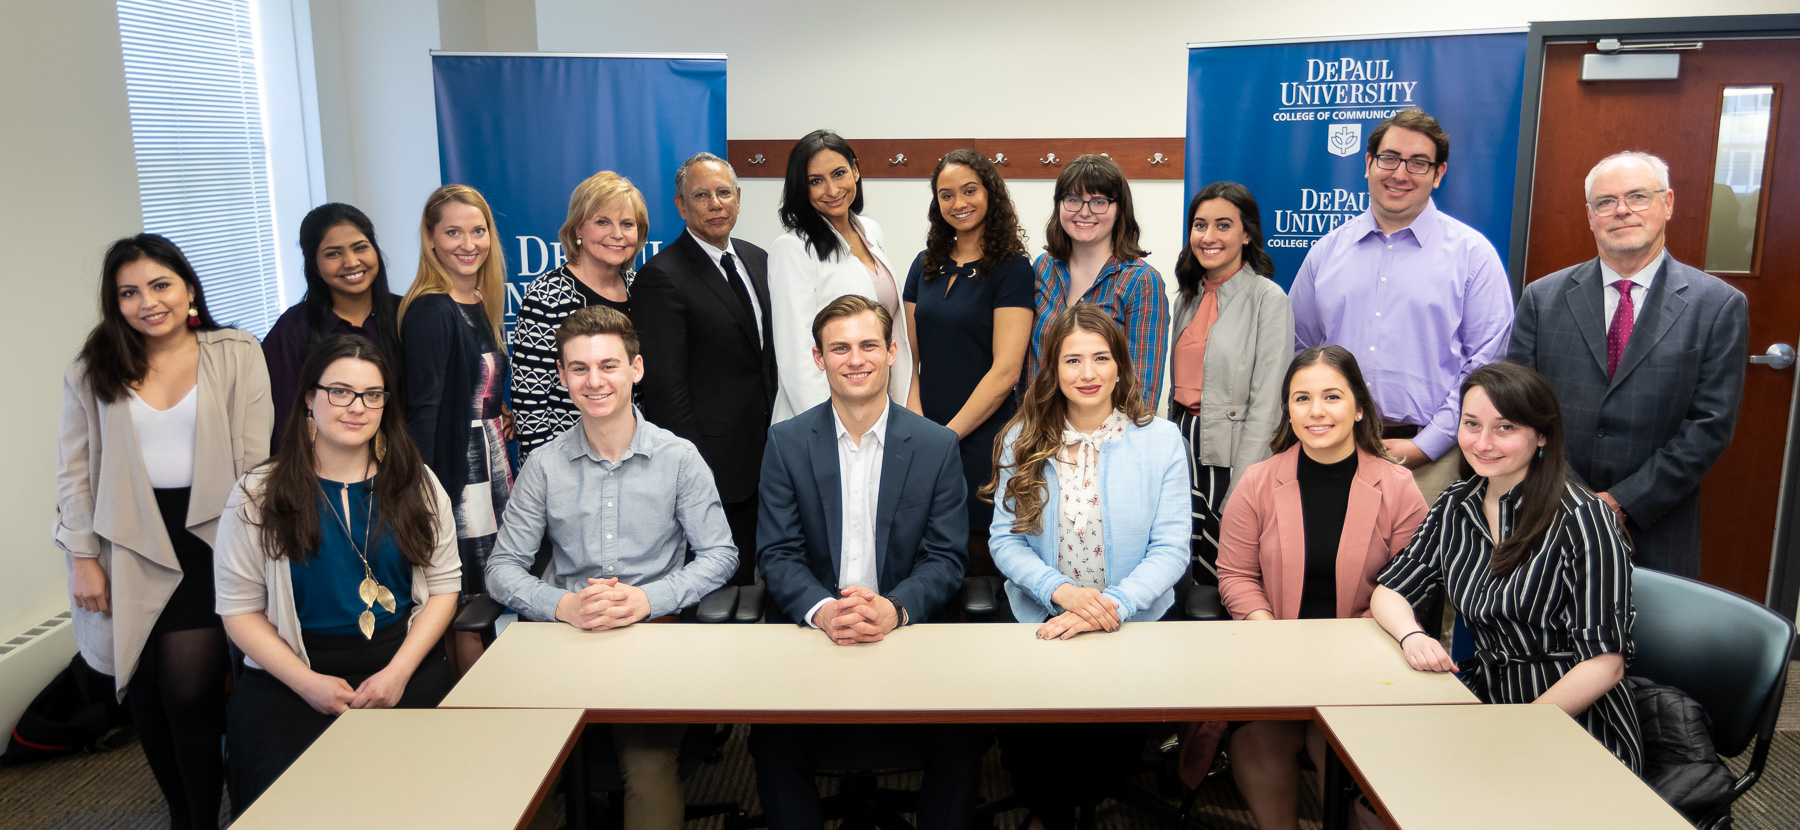 The distinguished journalists along with College of Communications journalism students. (DePaul University/Jeff Carrion)